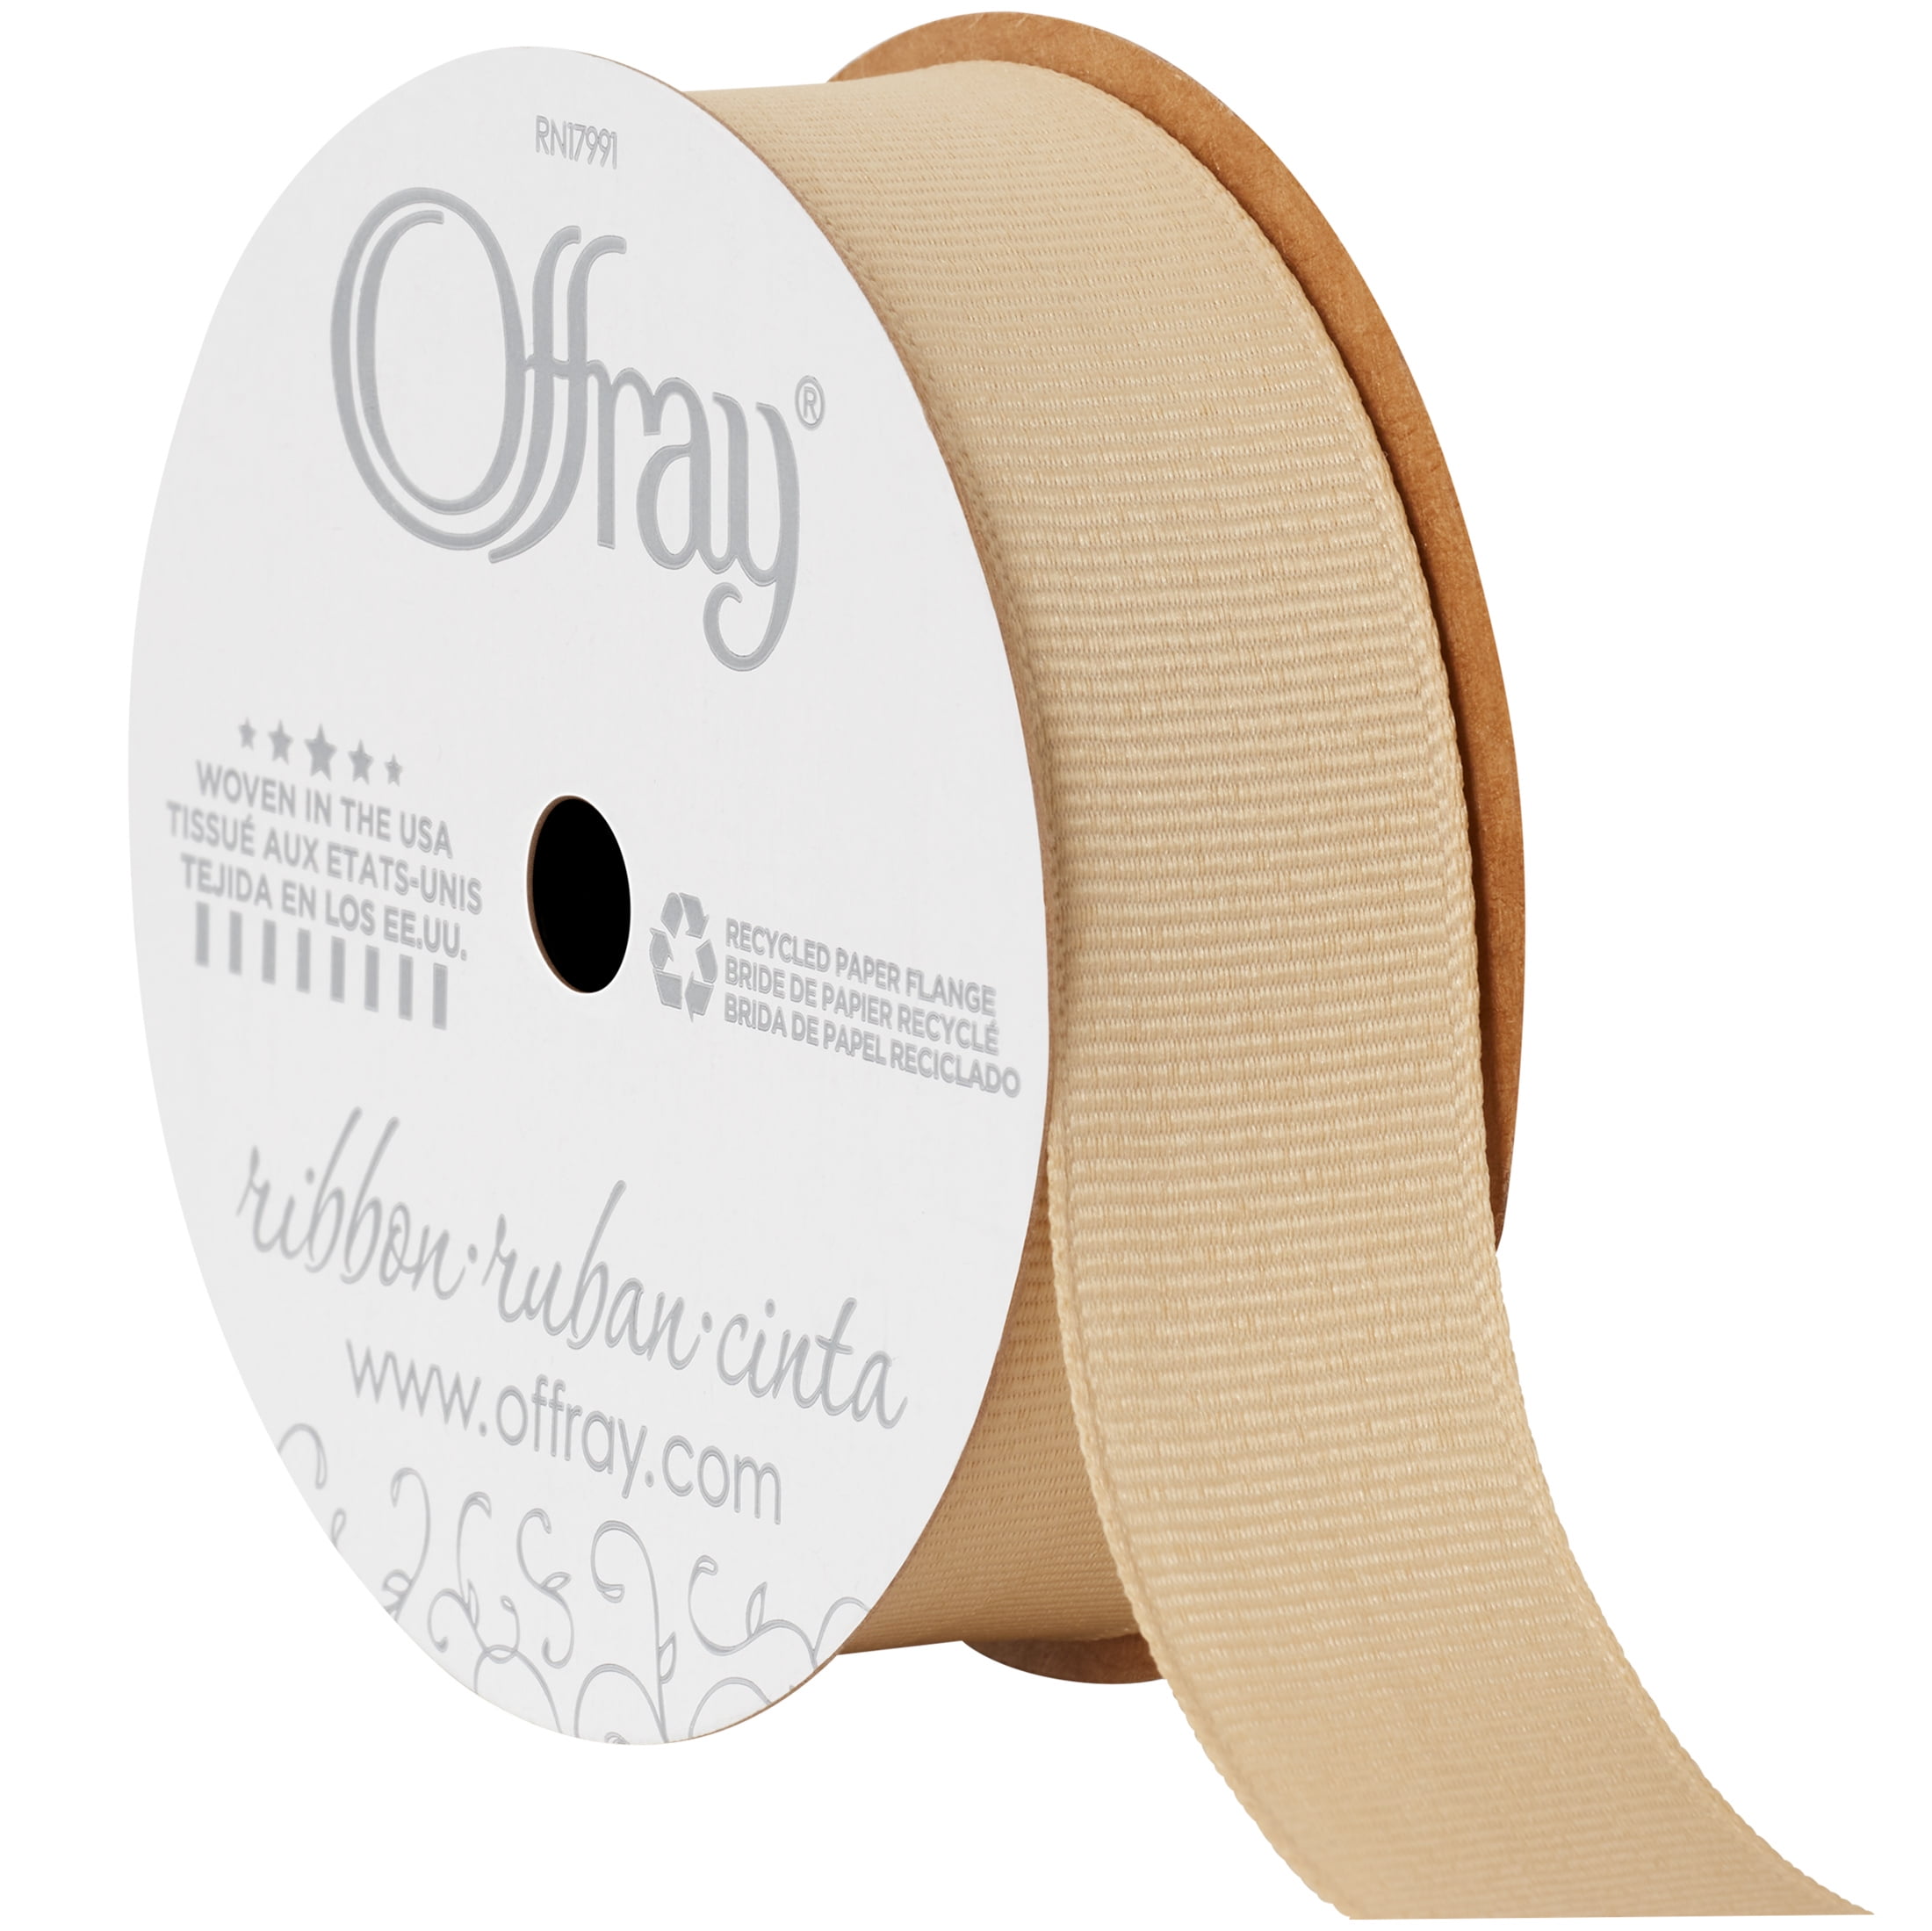 Offray 5/8 Wide Grosgrain Craft and Decorative Ribbon, 21 Total Feet, Antique White